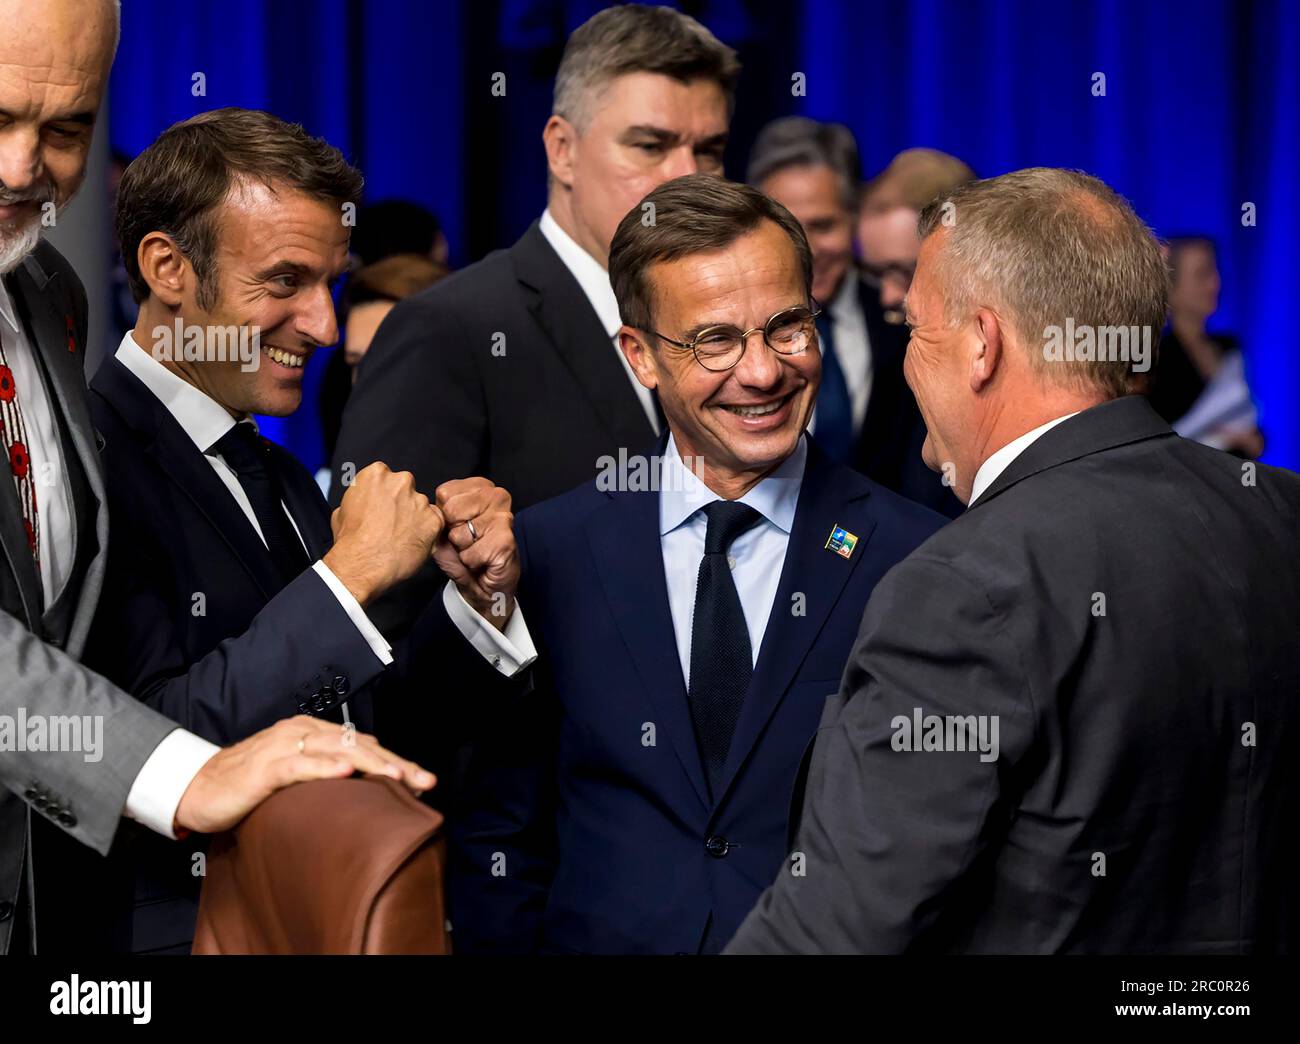 Vilnius, Lithuania. 11th July, 2023. President of France Emmanuel Macron, (L), reacts as he speaks with Swedish Prime Minister Ulf Kristersson (C) and Denmark's Foreign Minister Lars Lokke Rasmussen (R) as they attend the NATO Summit in Vilnius, Lithuania, Tuesday, July 11, 2023. Photo by NATO/ Credit: UPI/Alamy Live News Stock Photo